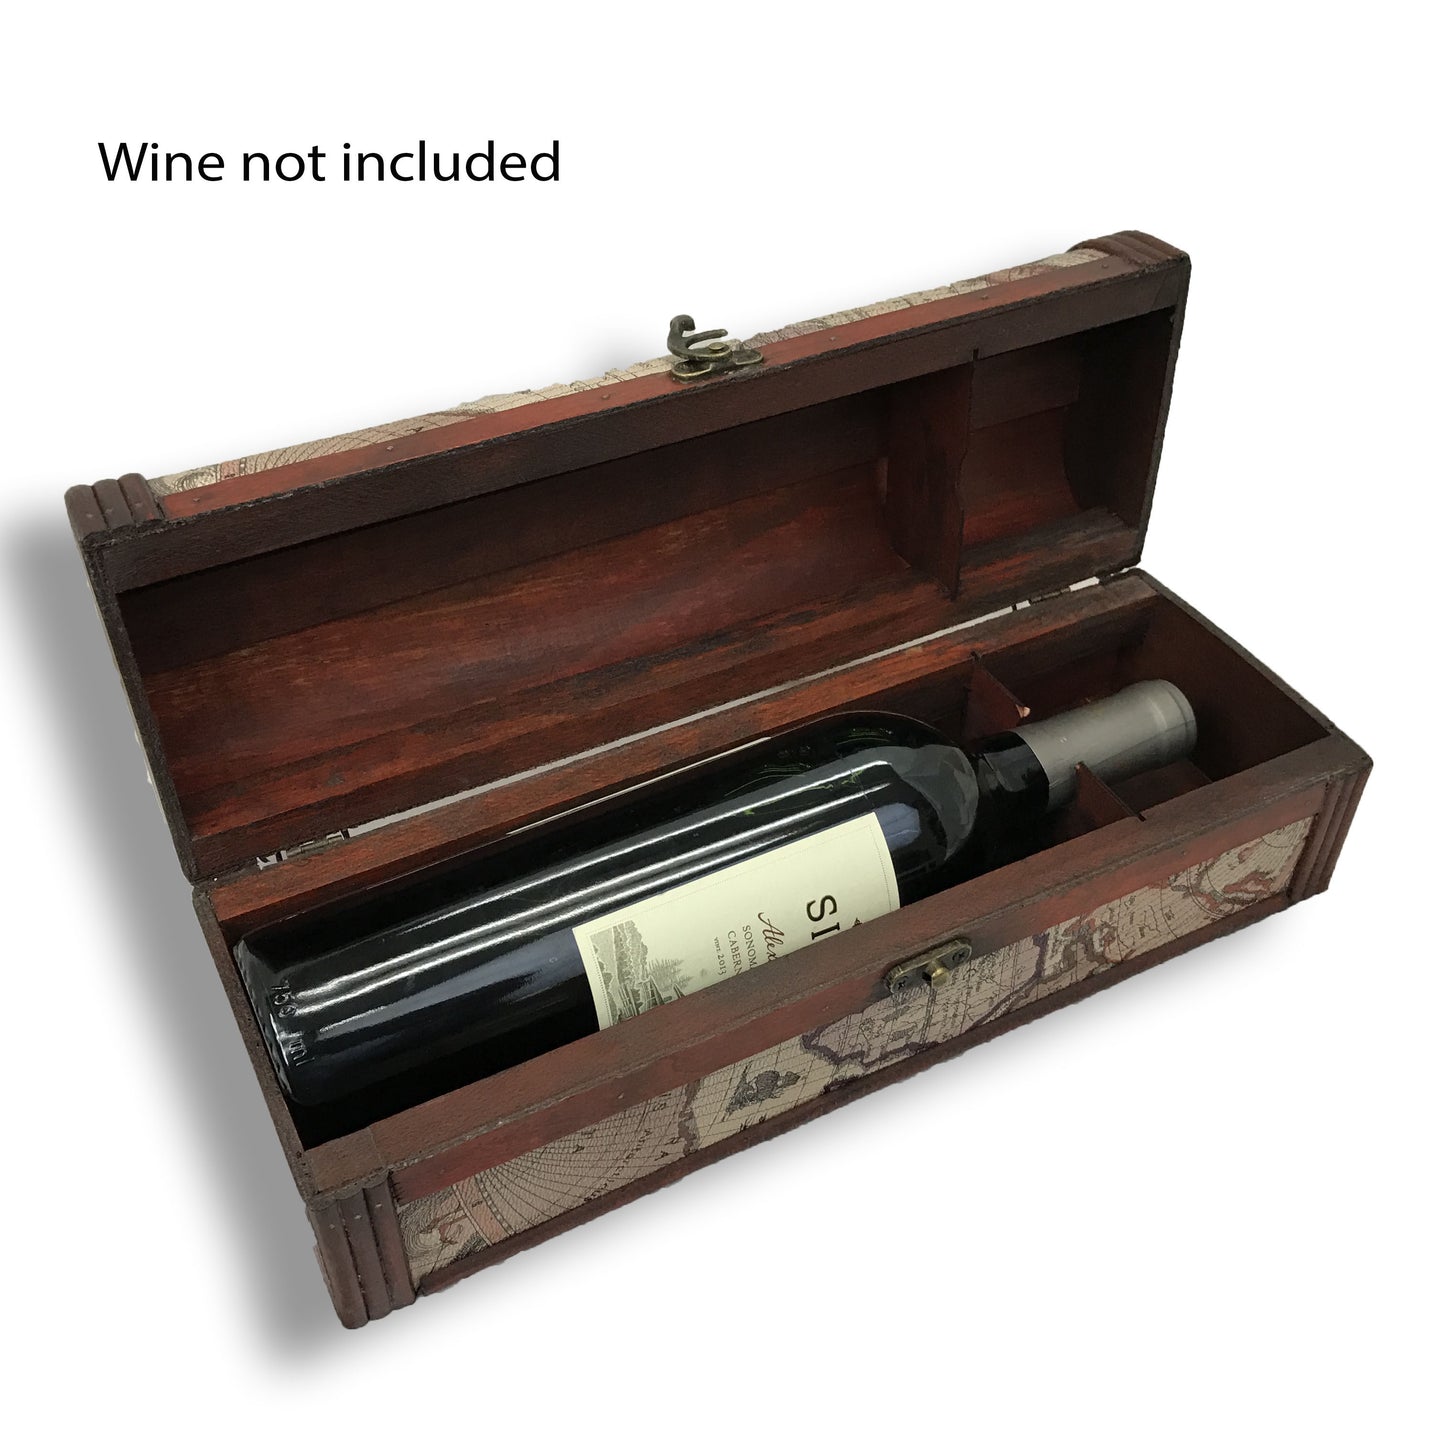 Allgala Wooden Wine Bottle Box with Antique Finish, Old Map